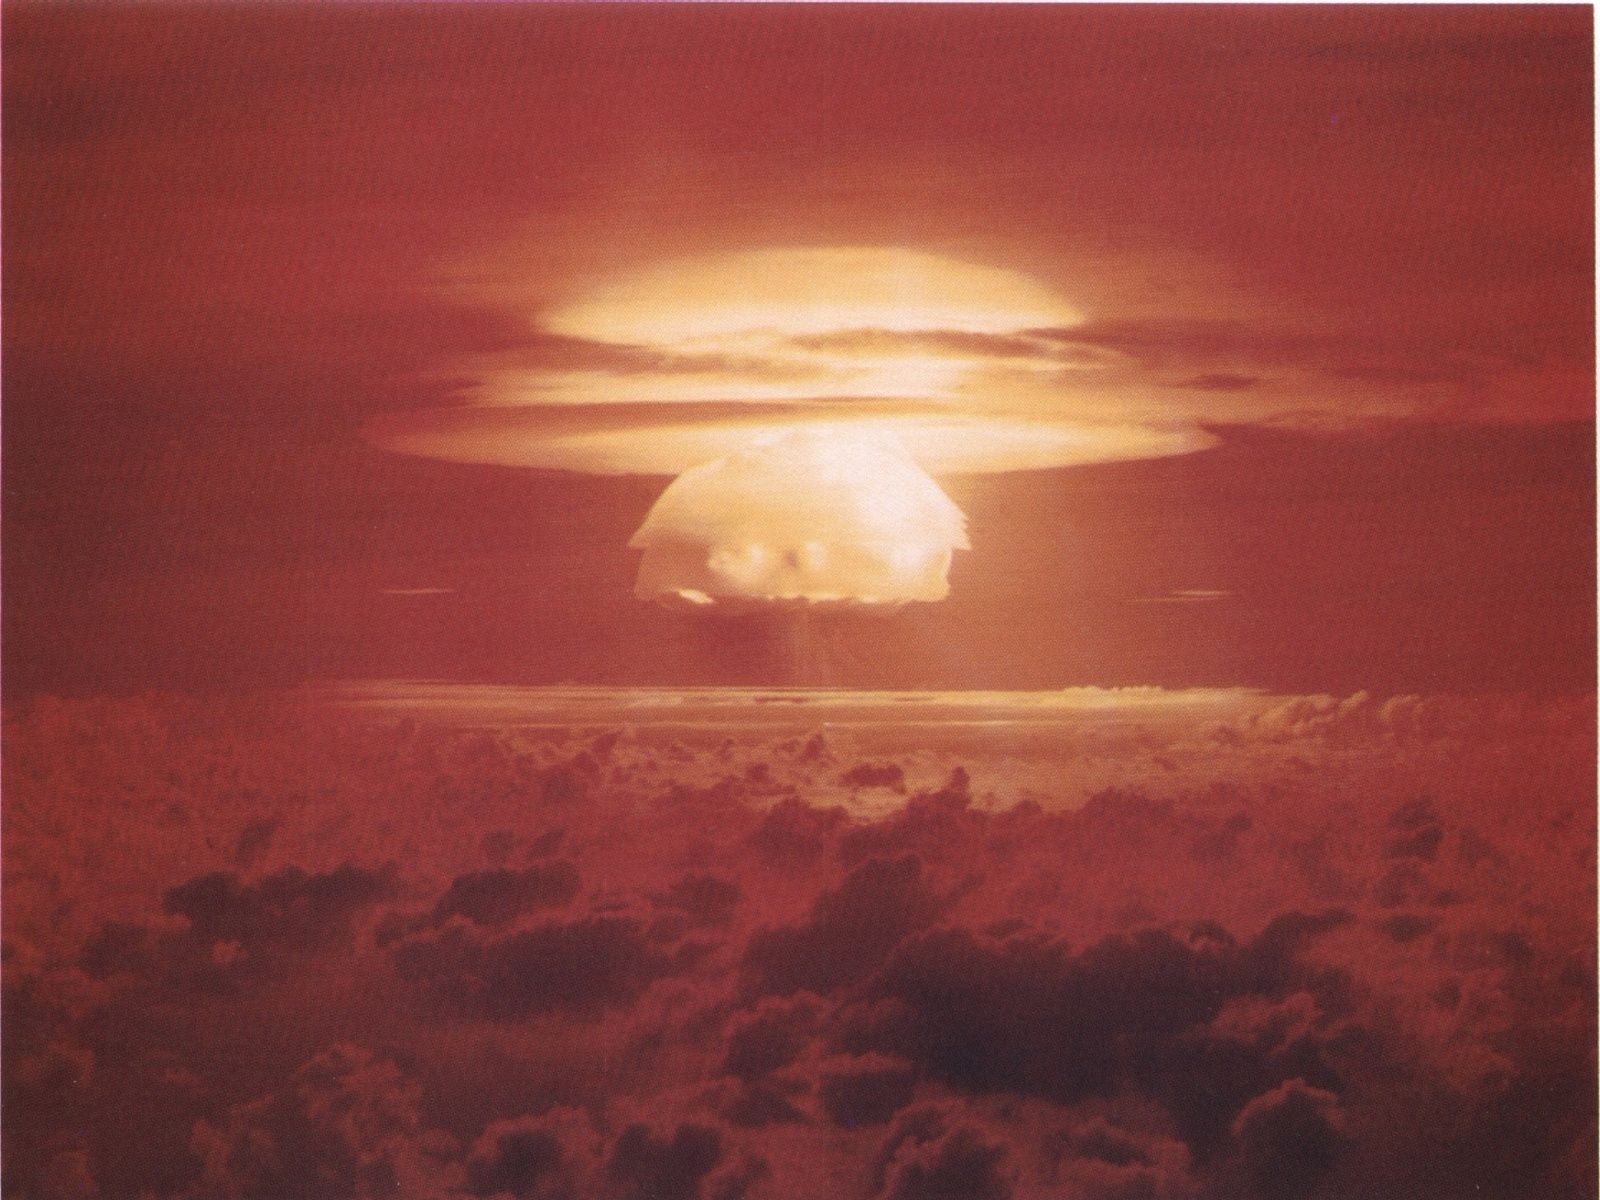 Why Truman Dropped The Atomic Bomb On Japan He Had No Other Images, Photos, Reviews